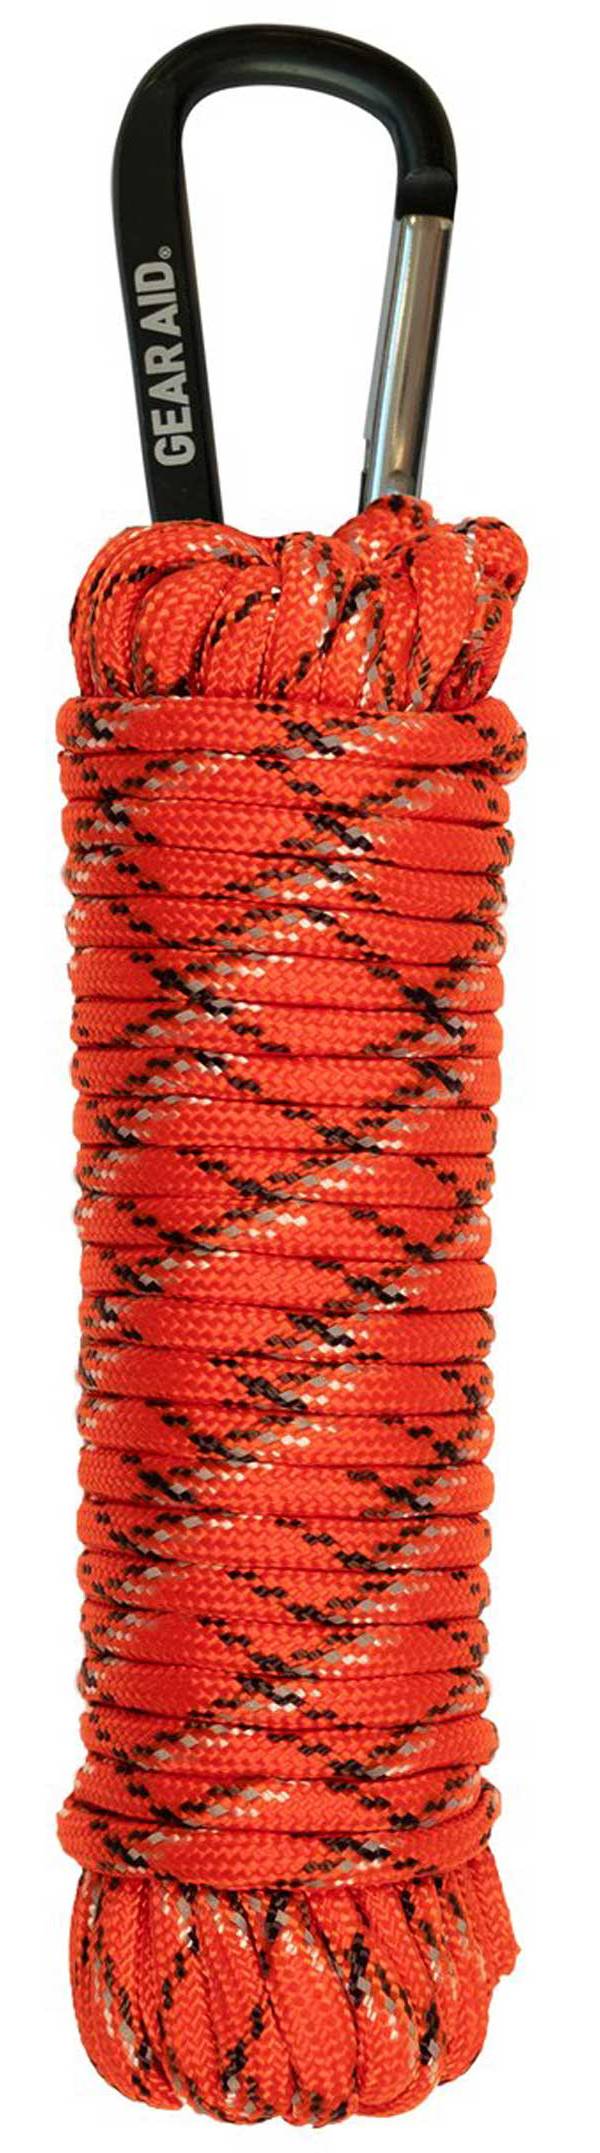 Gear Aid 30' 550 Paracord product image